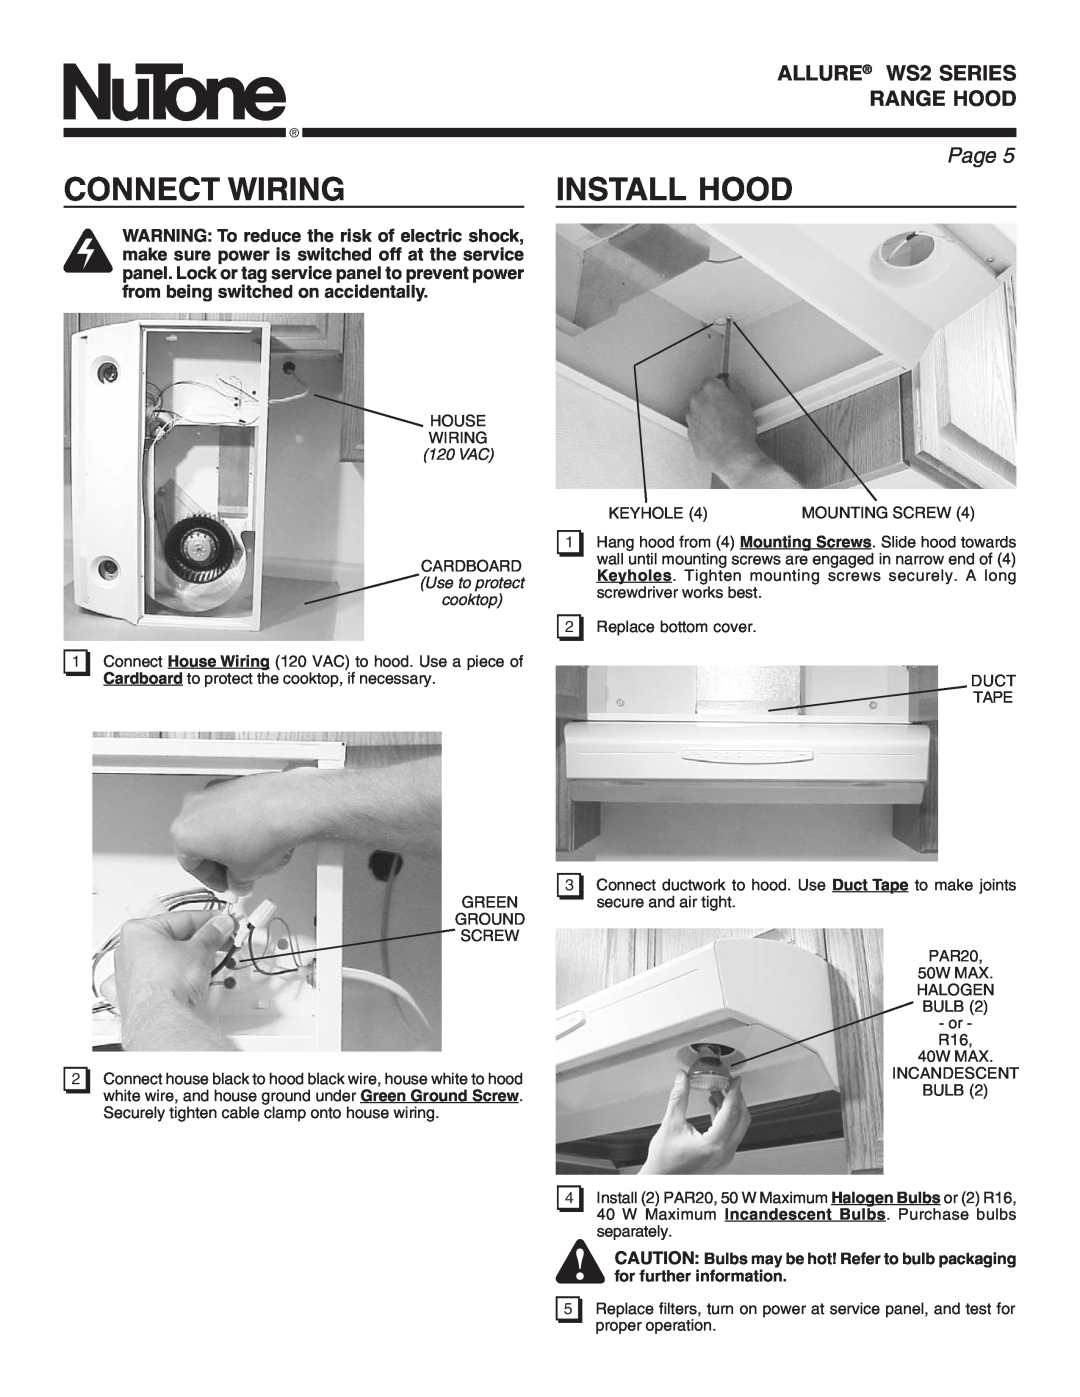 NuTone manual Connect Wiring, Install Hood, ALLURE WS2 SERIES RANGE HOOD, Page, from being switched on accidentally 